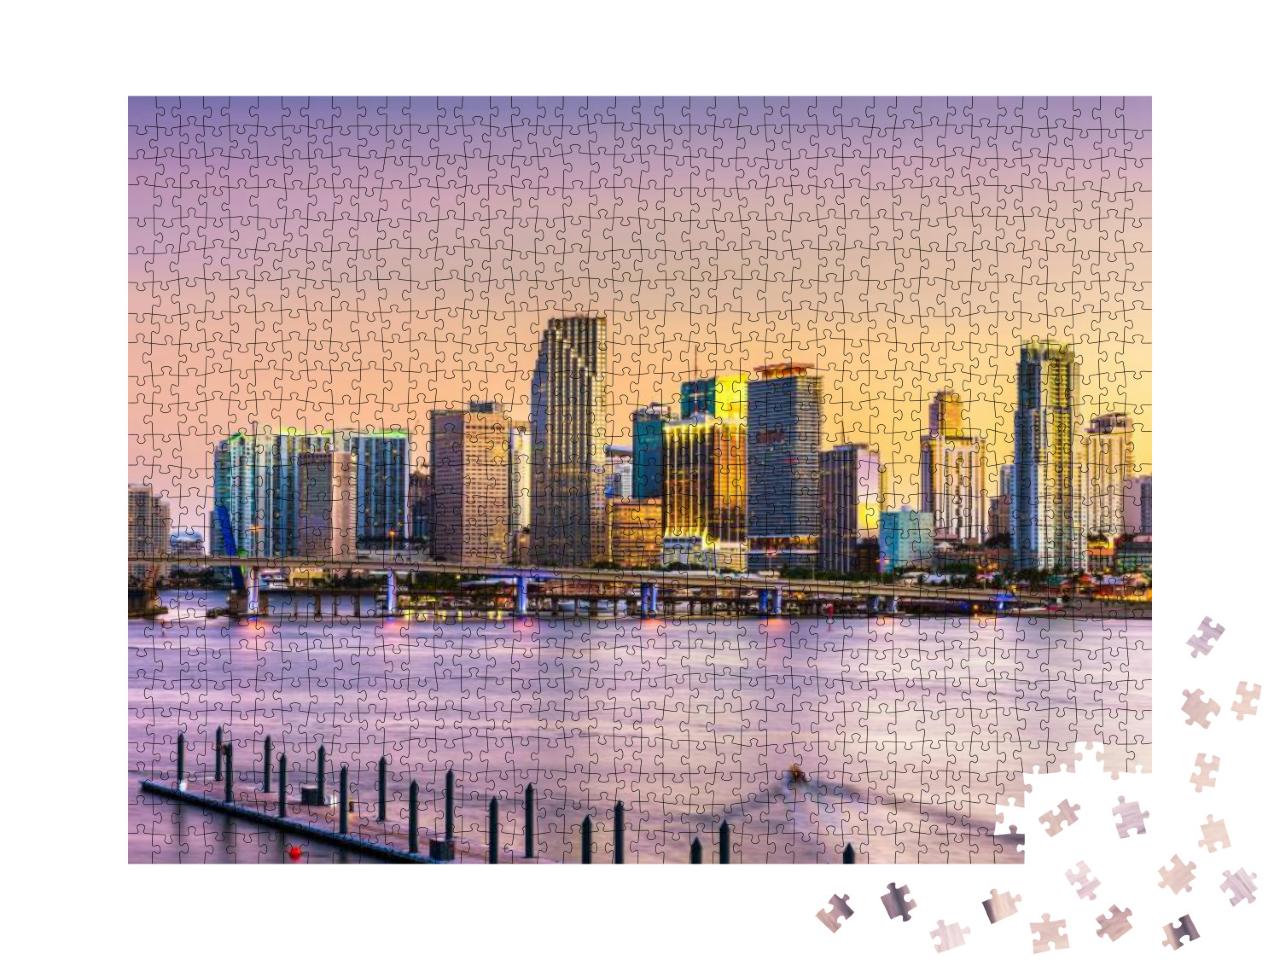 Miami, Florida, USA Skyline on Biscayne Bay At Dusk... Jigsaw Puzzle with 1000 pieces